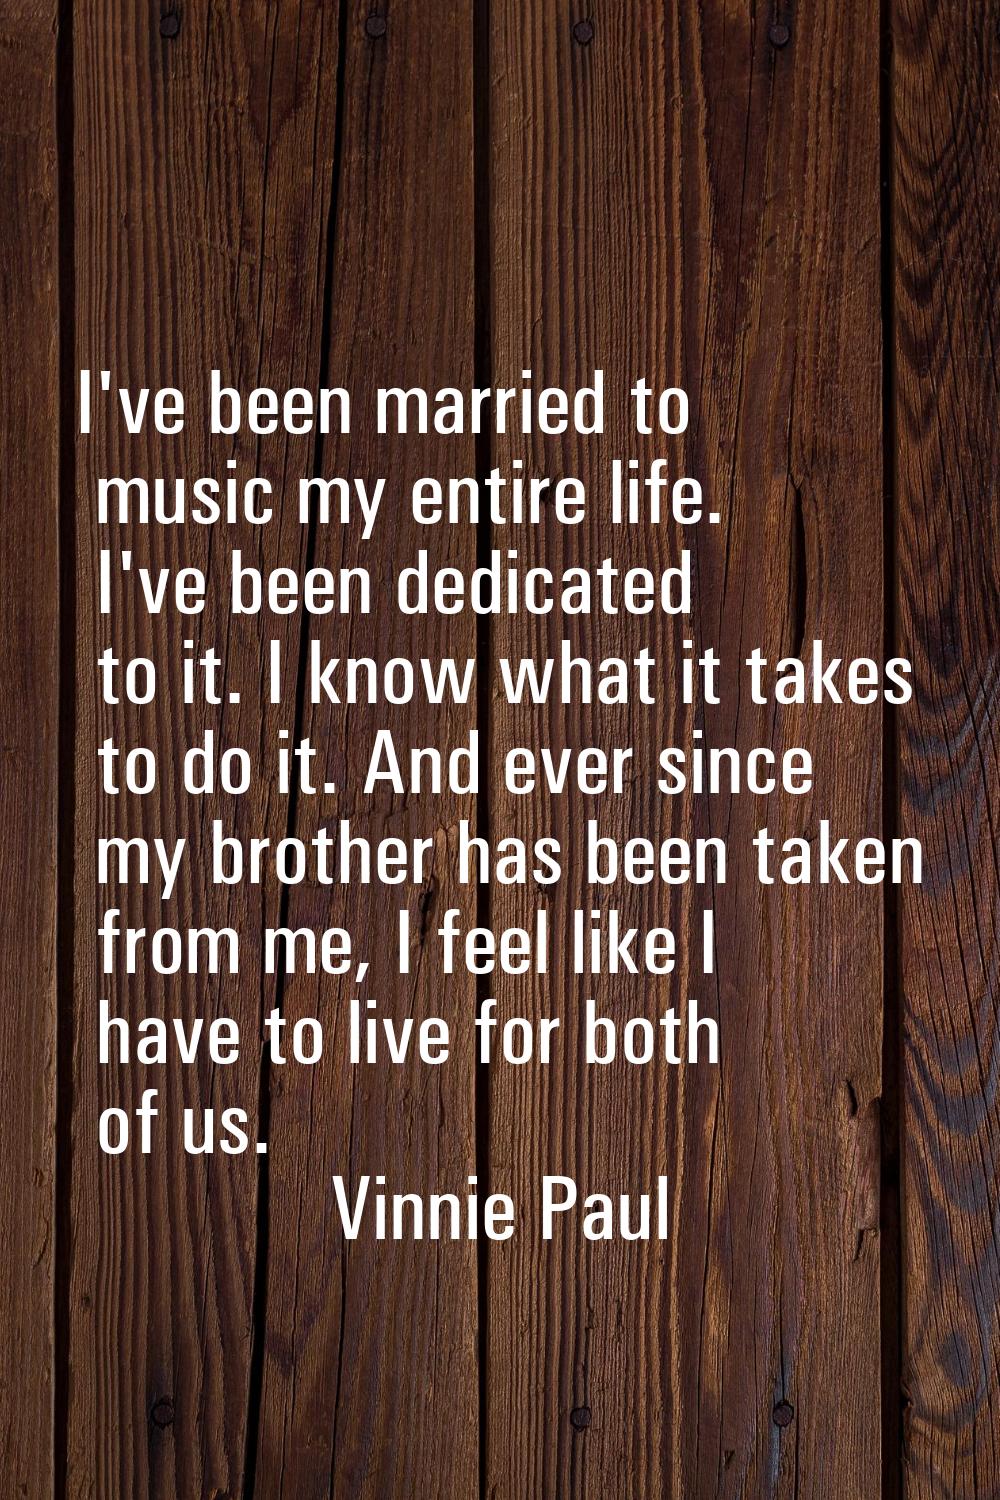 I've been married to music my entire life. I've been dedicated to it. I know what it takes to do it